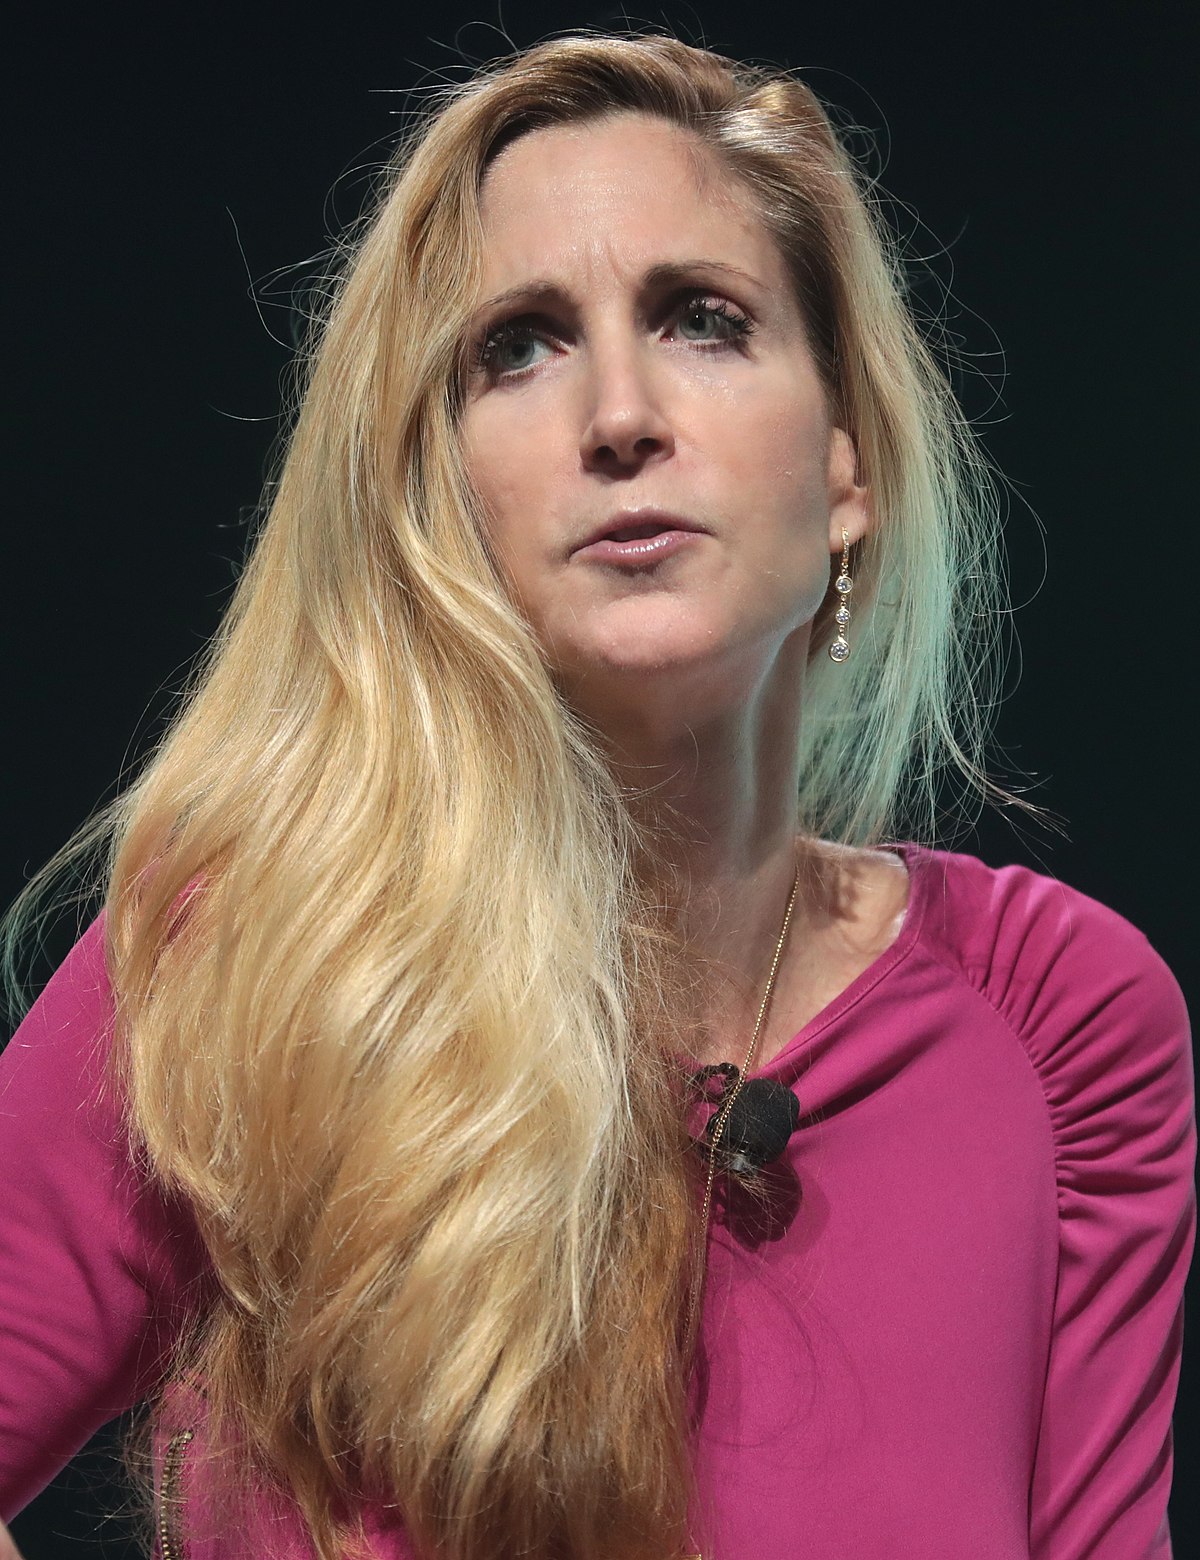 Cornell alum Ann Coulter sparks excitement with her speech at Cornell University. Watch the video here!